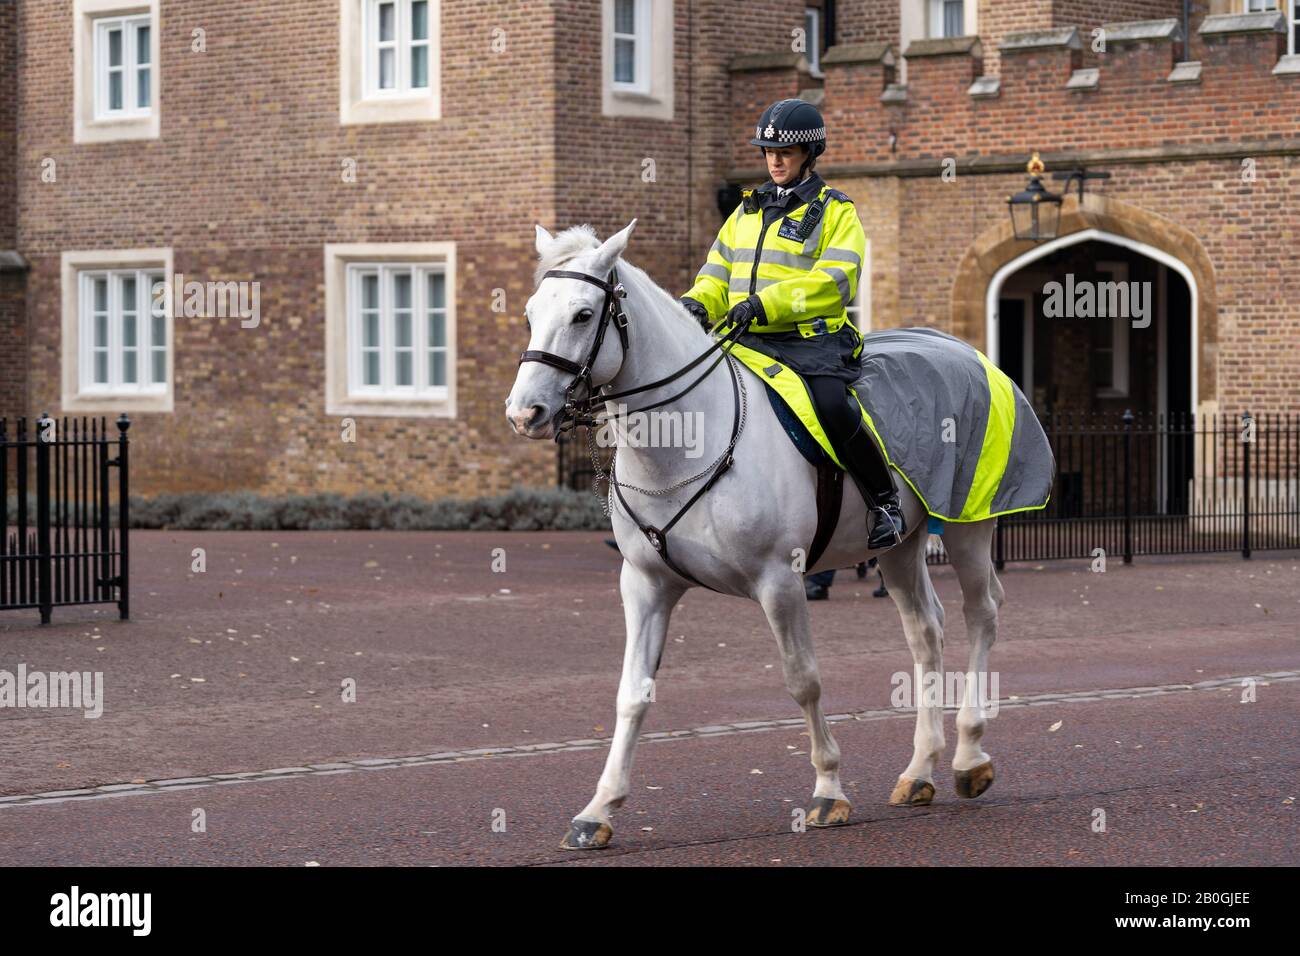 Police officer on horse in London Stock Photo